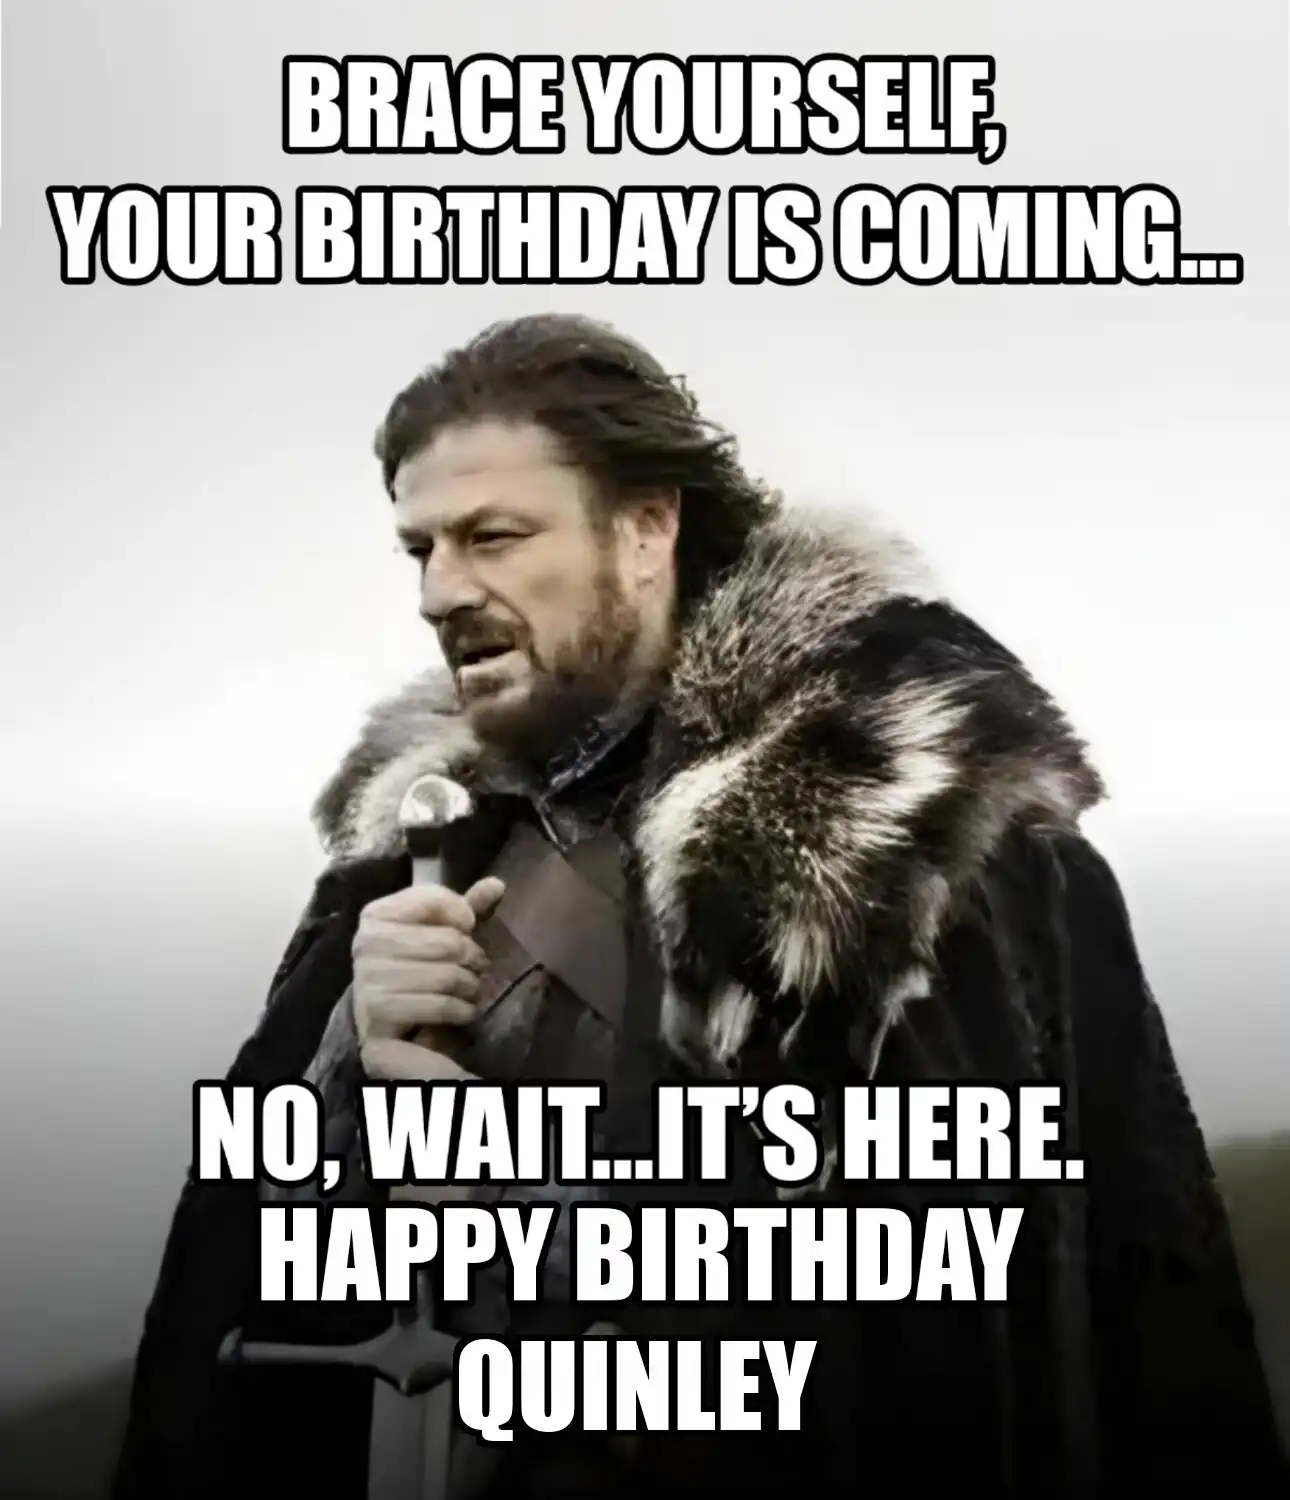 Happy Birthday Quinley Brace Yourself Your Birthday Is Coming Meme